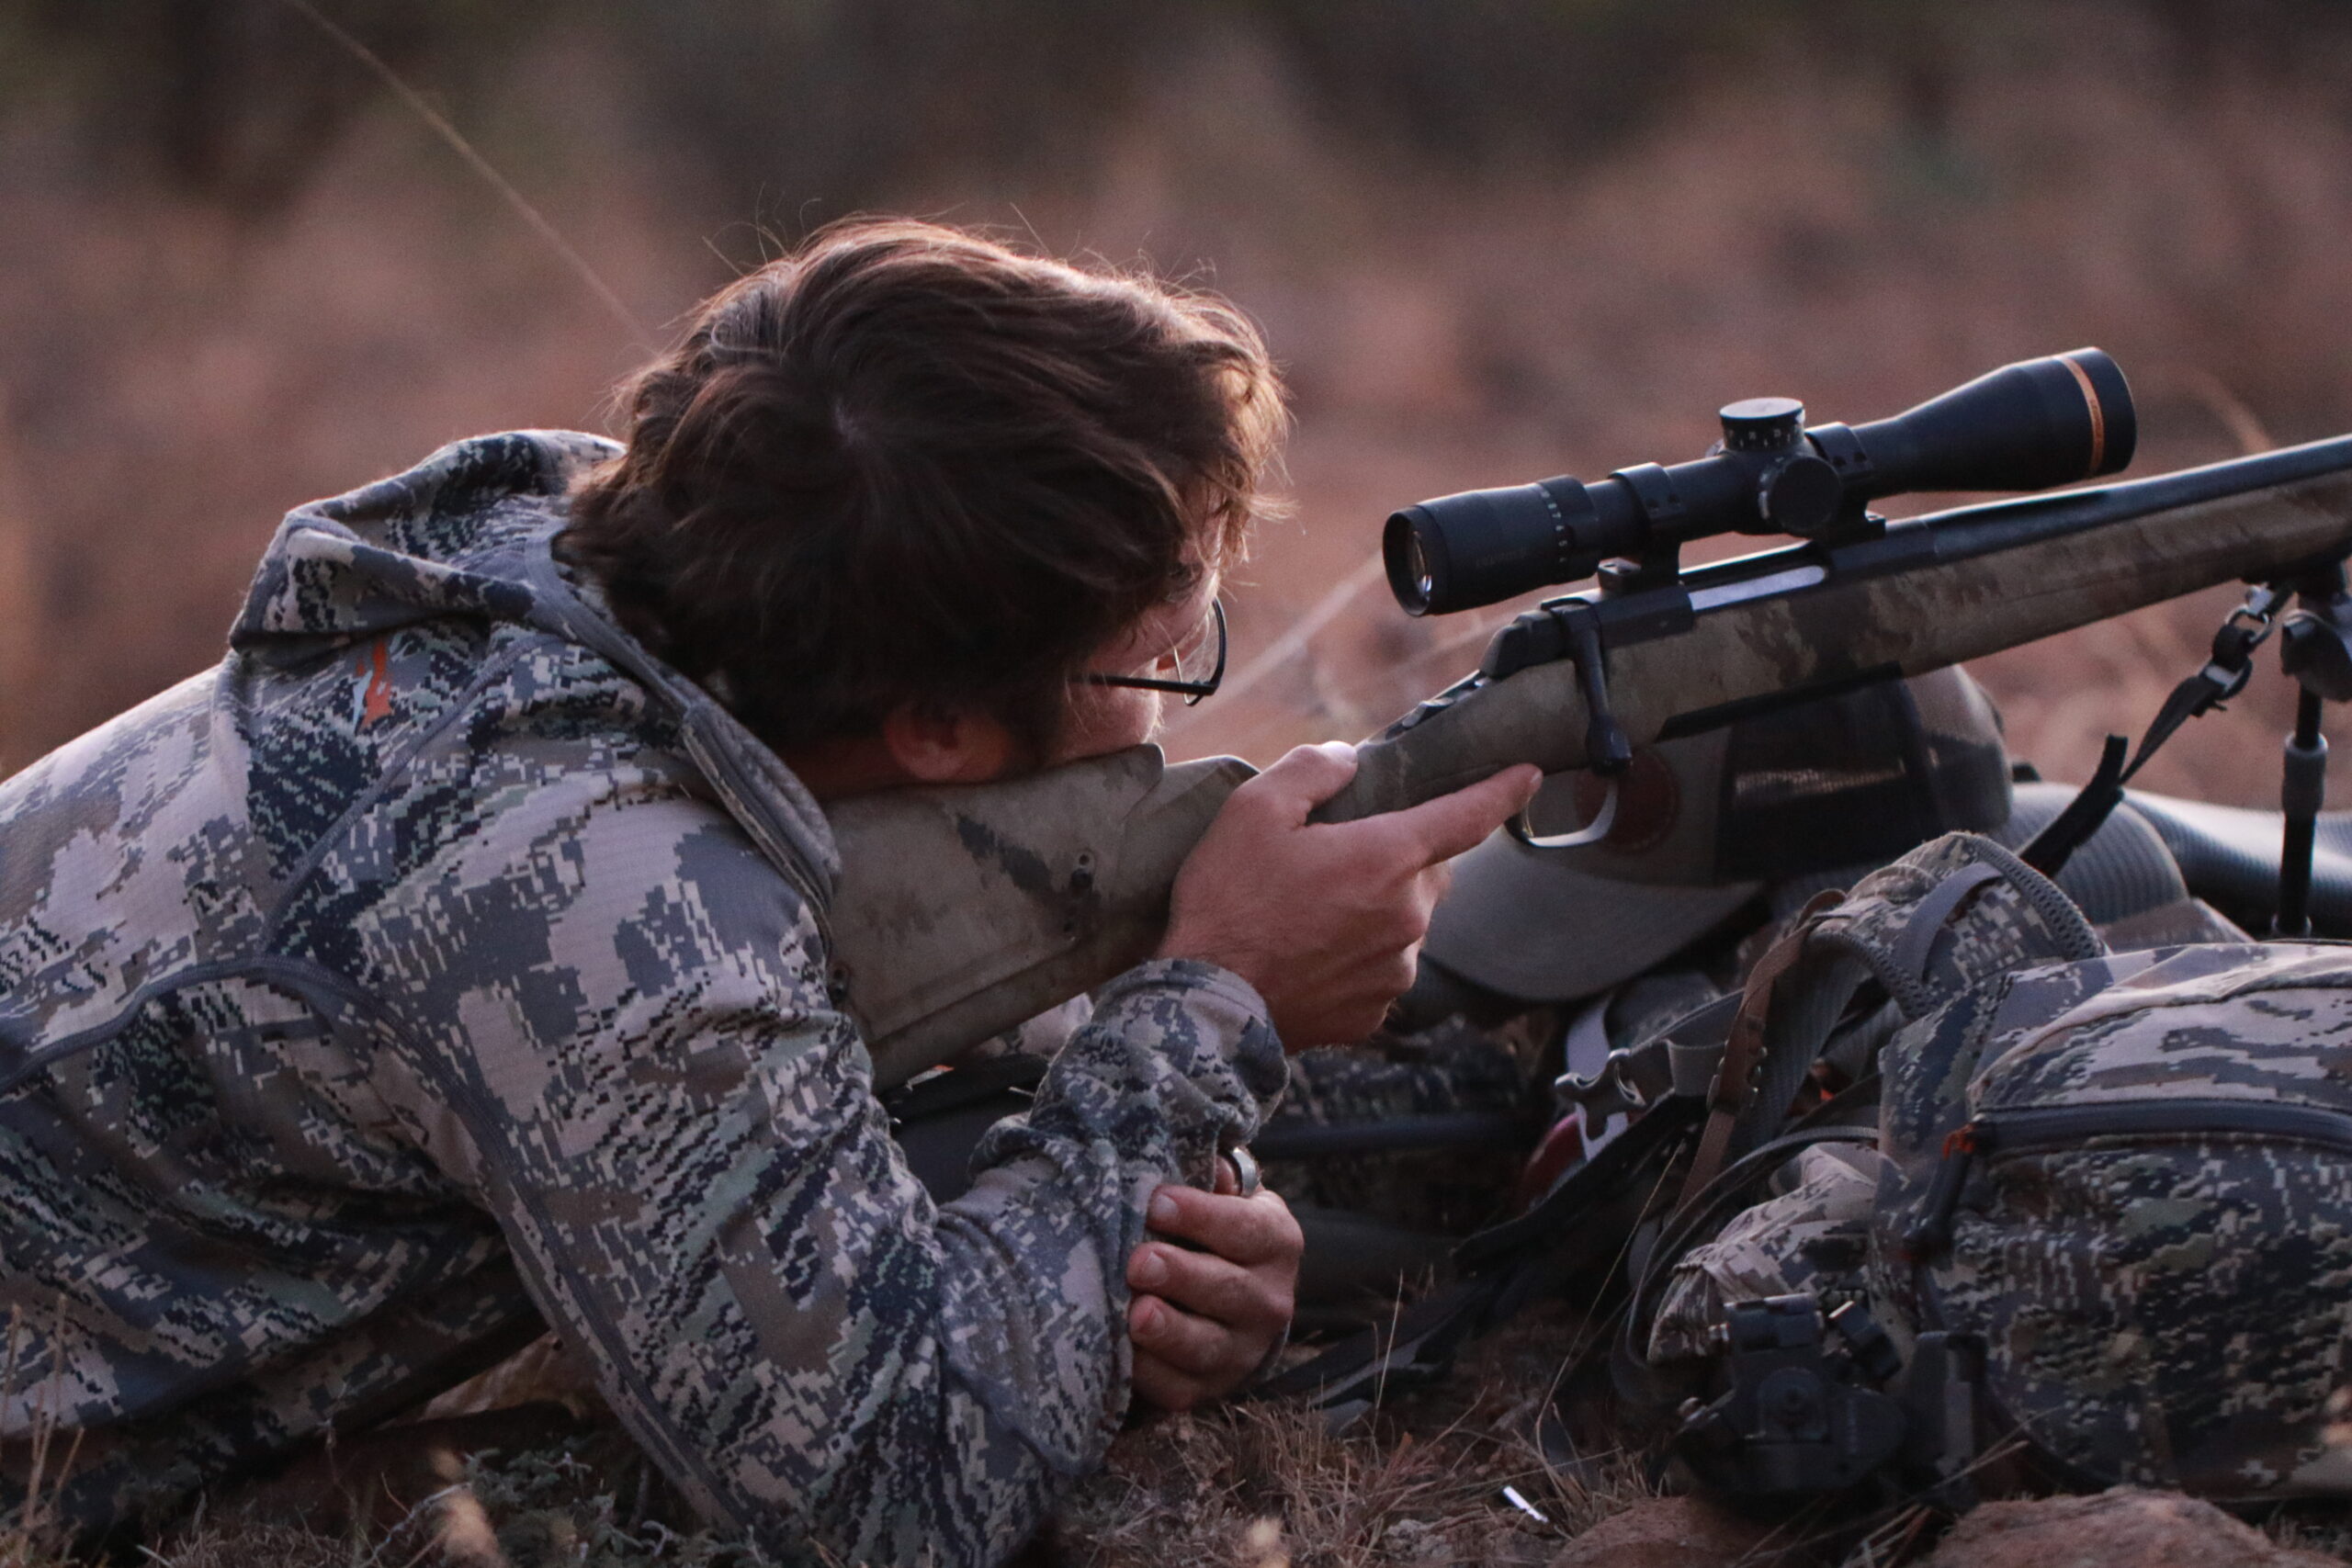 The Leupold Project Hunt contest wants to film one lucky winner this hunting season.